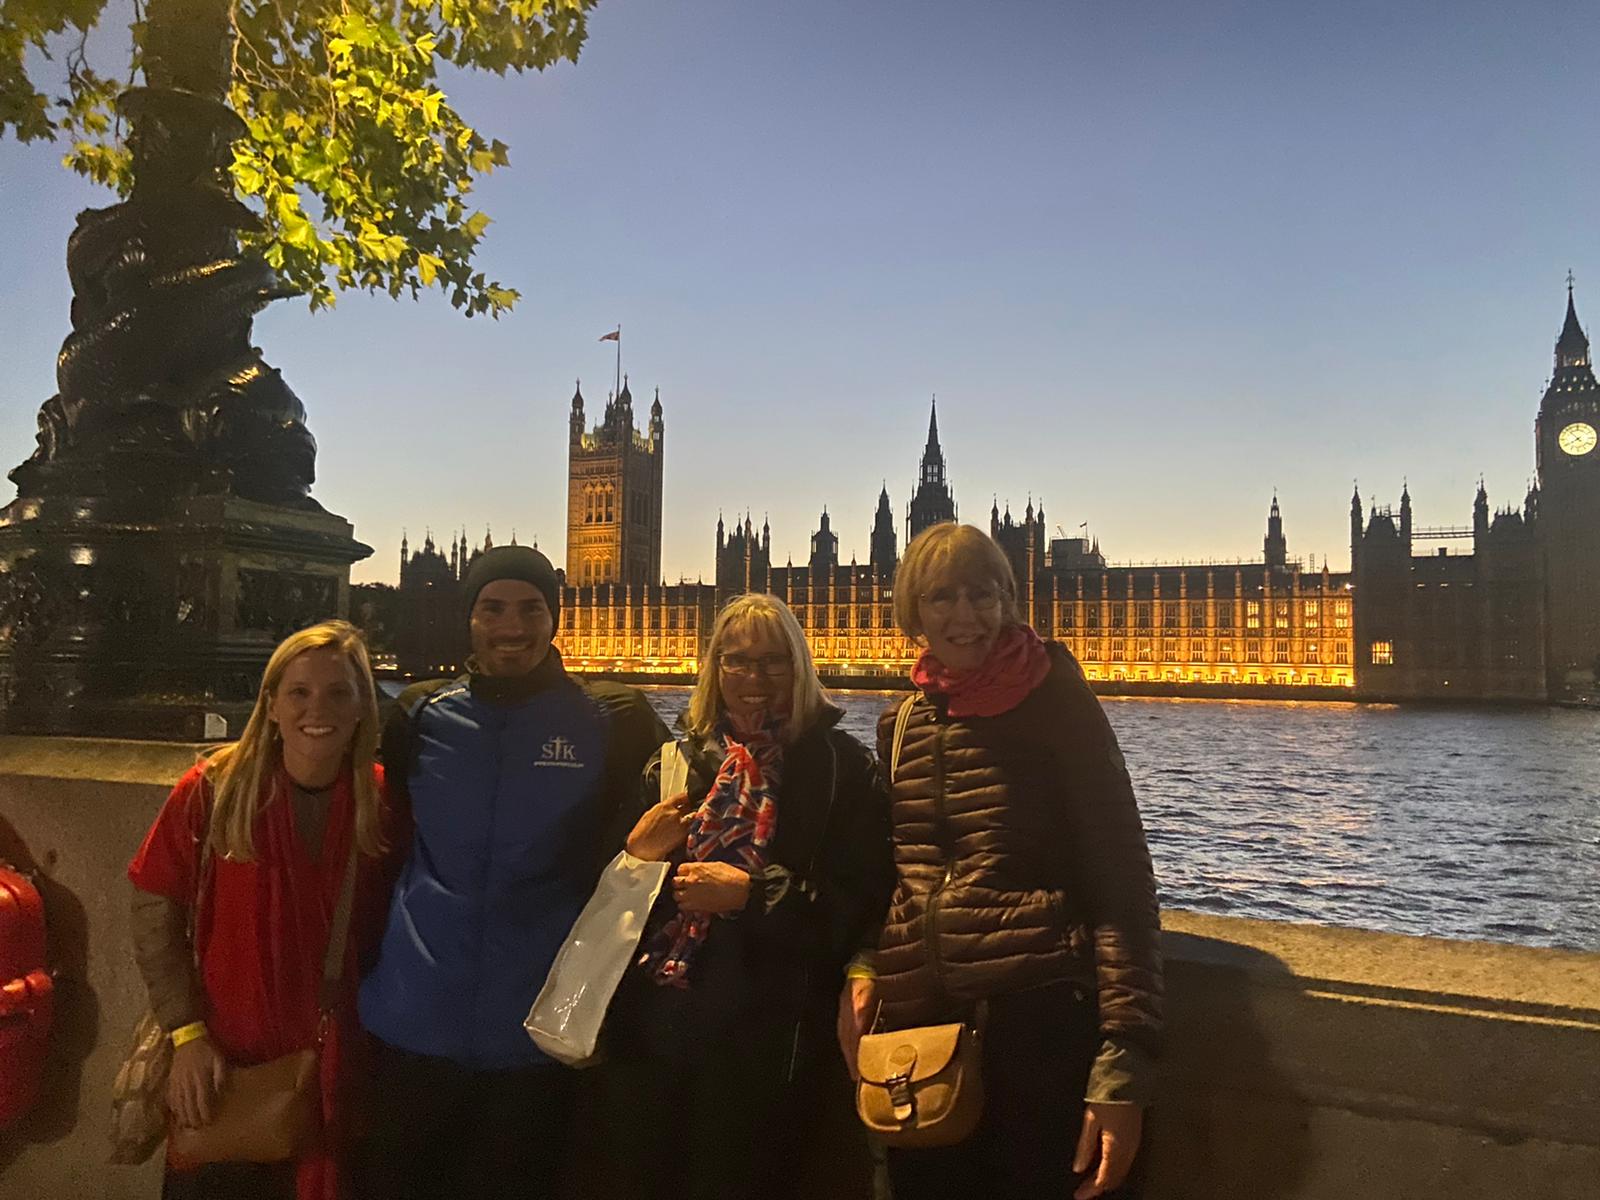 We reached Westminster in the evening of the 16th of September 2022 for the Lying-in-state